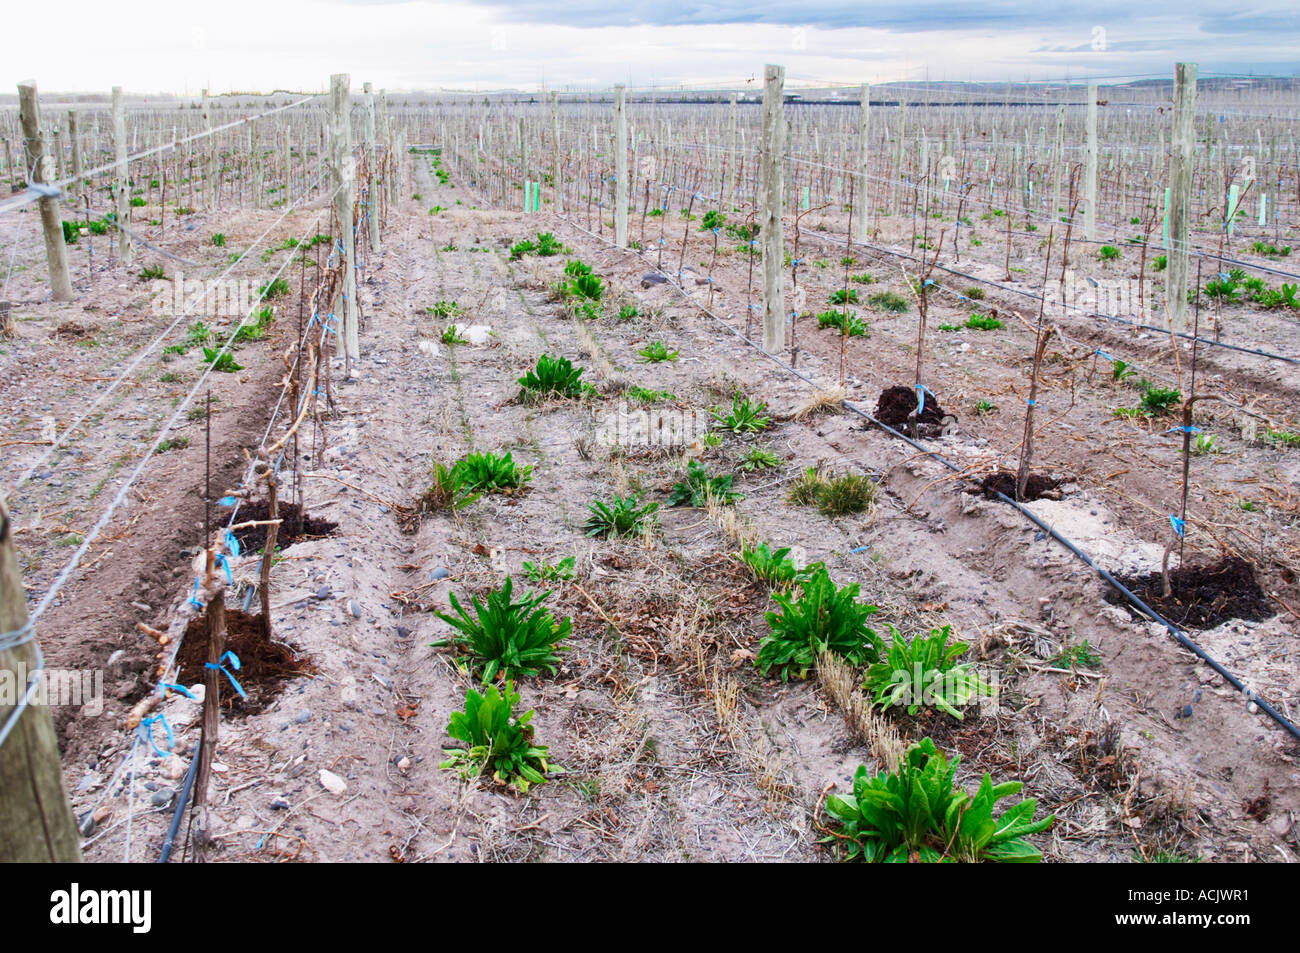 View over the vineyard, sandy soil and young vines, drip irrigation. Bodega NQN Winery, Vinedos de la Patagonia, Neuquen, Patagonia, Argentina, South America Stock Photo